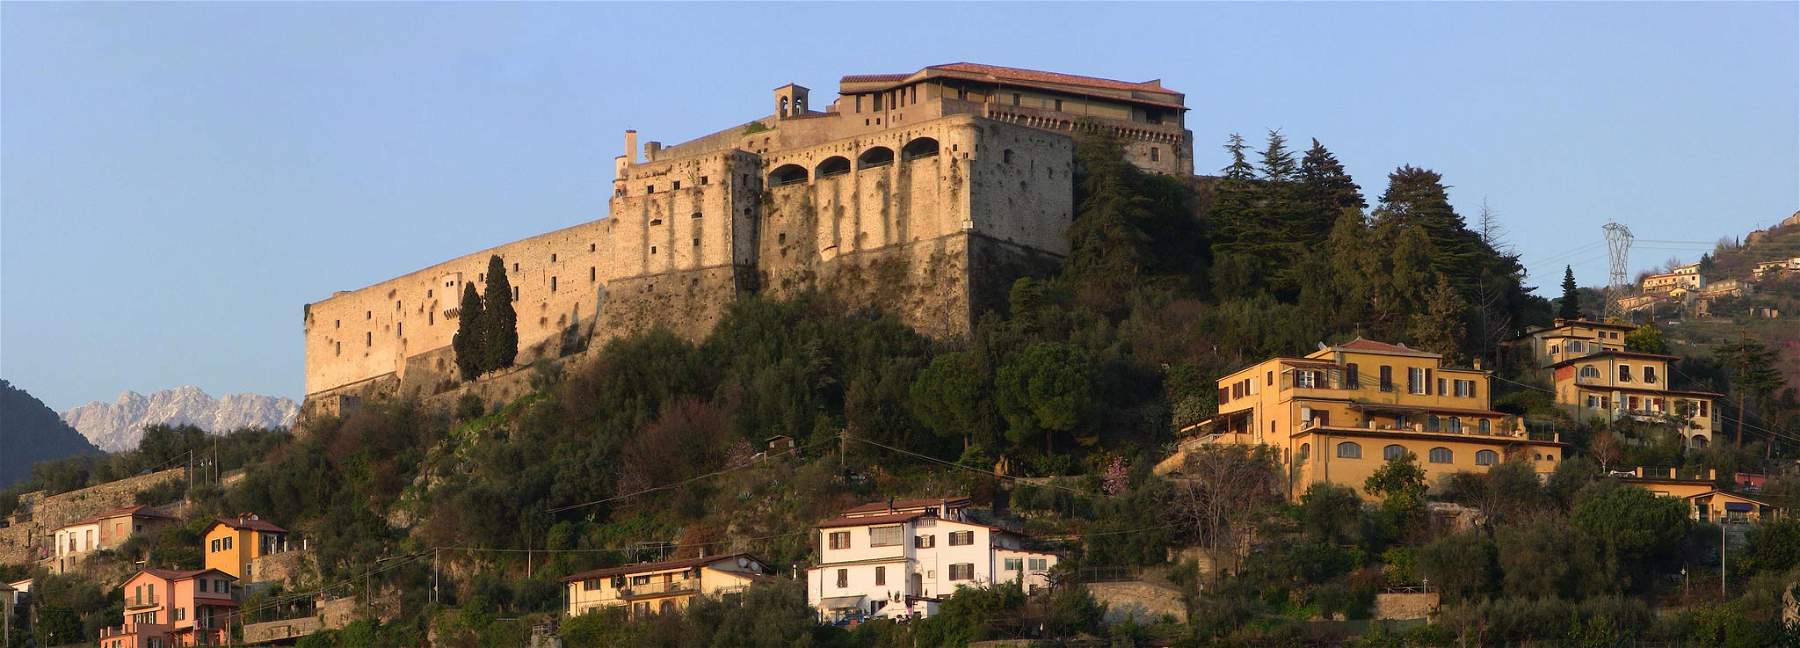 Jazz to enhance castles and museums: the 6th edition of the MutaMenti festival in Lunigiana